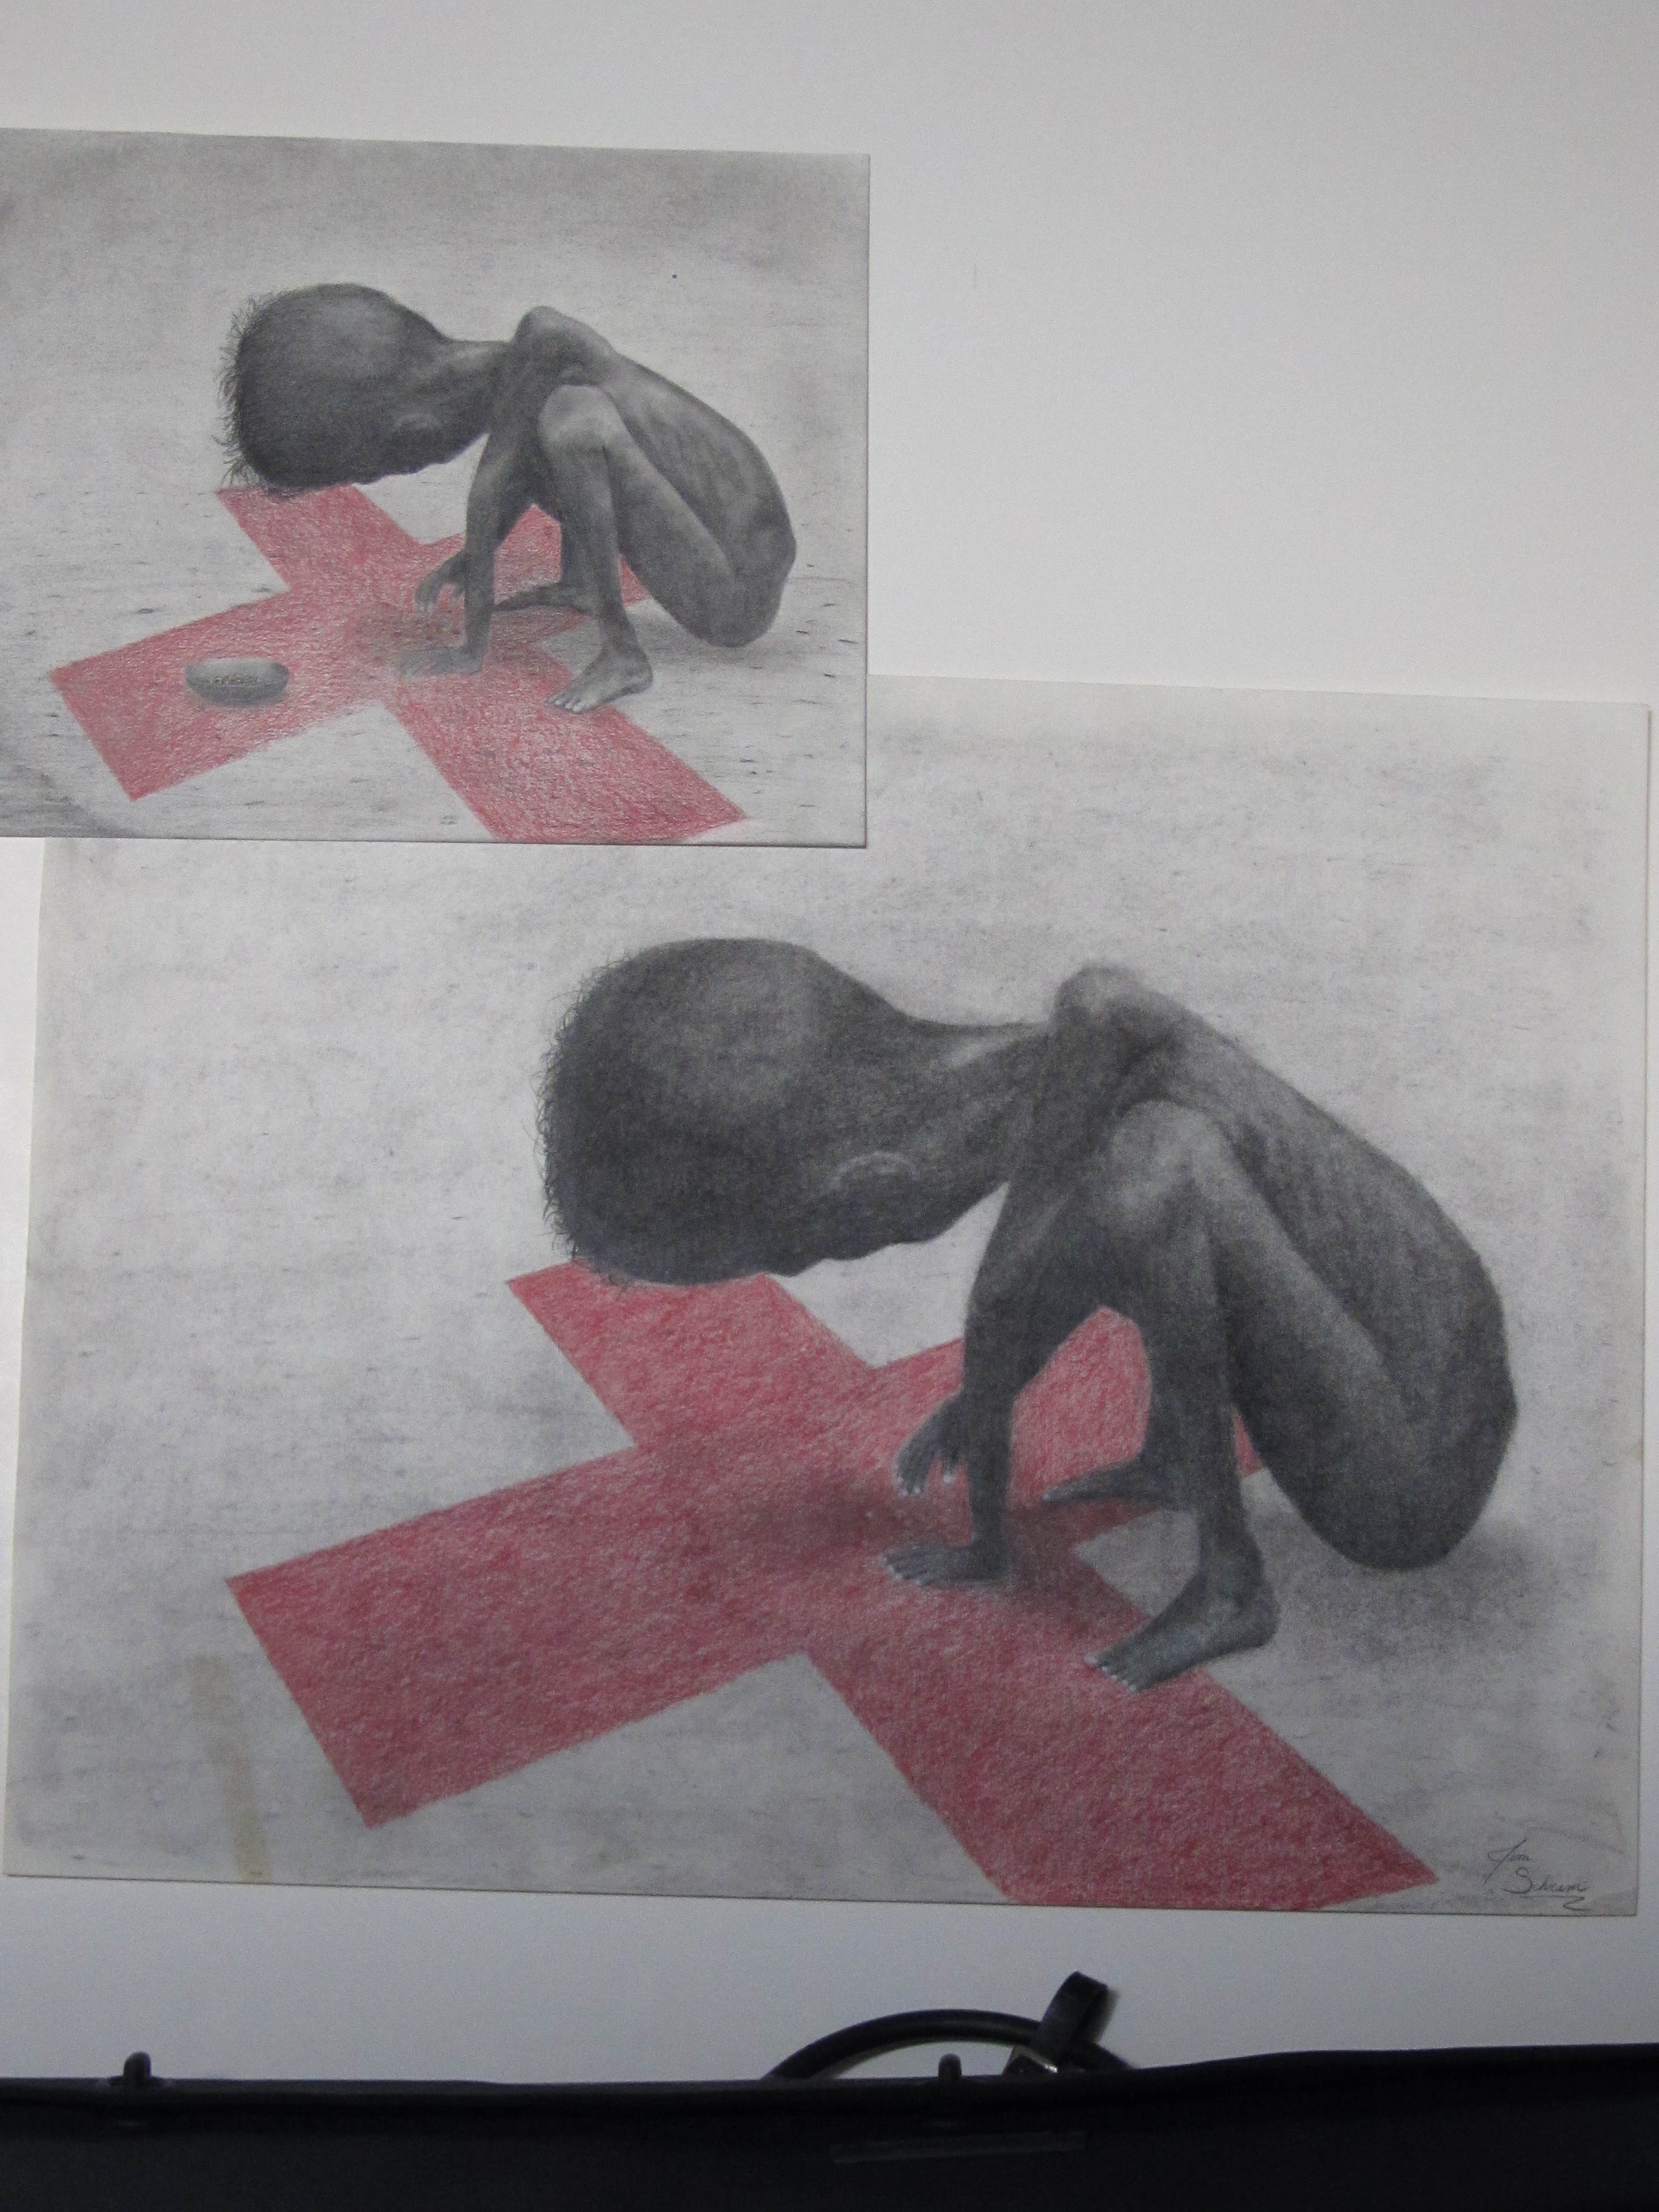 Poverty Image, Charcoal & Colored Pencil